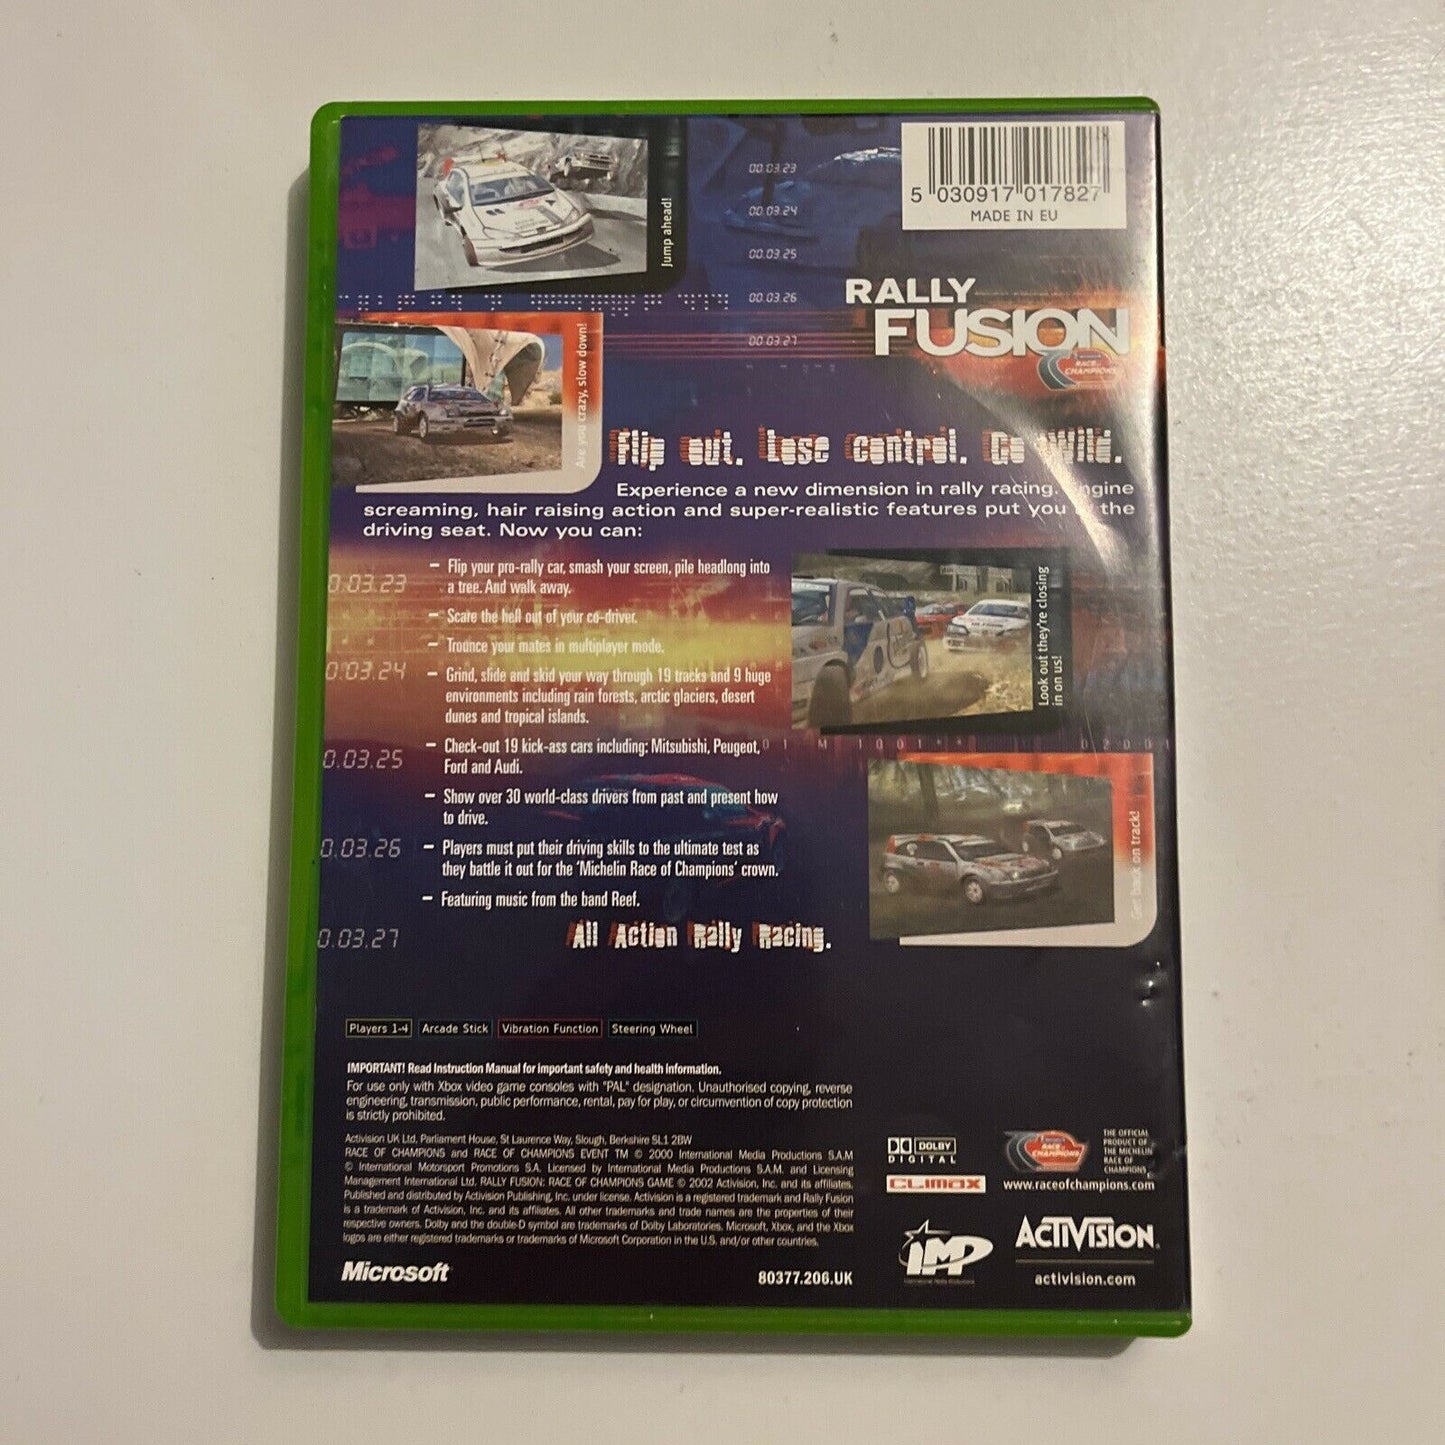 Rally Fusion: Race of Champions - Microsoft Xbox Original PAL Game With Manual